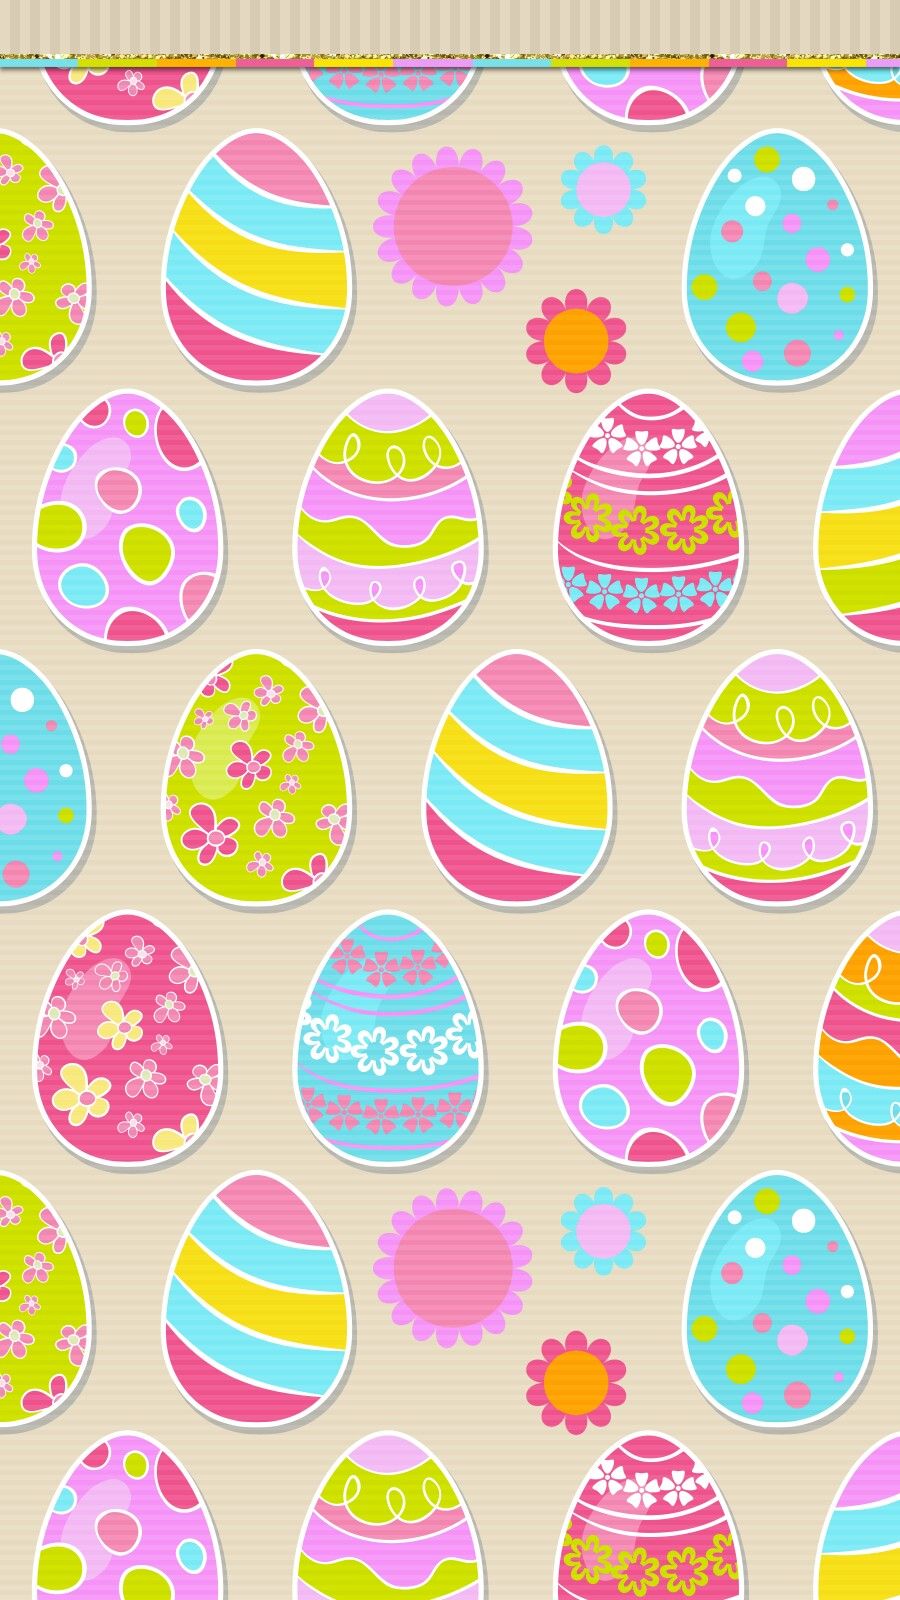 easter egg wallpaper iphone Cute walls by me in 2019